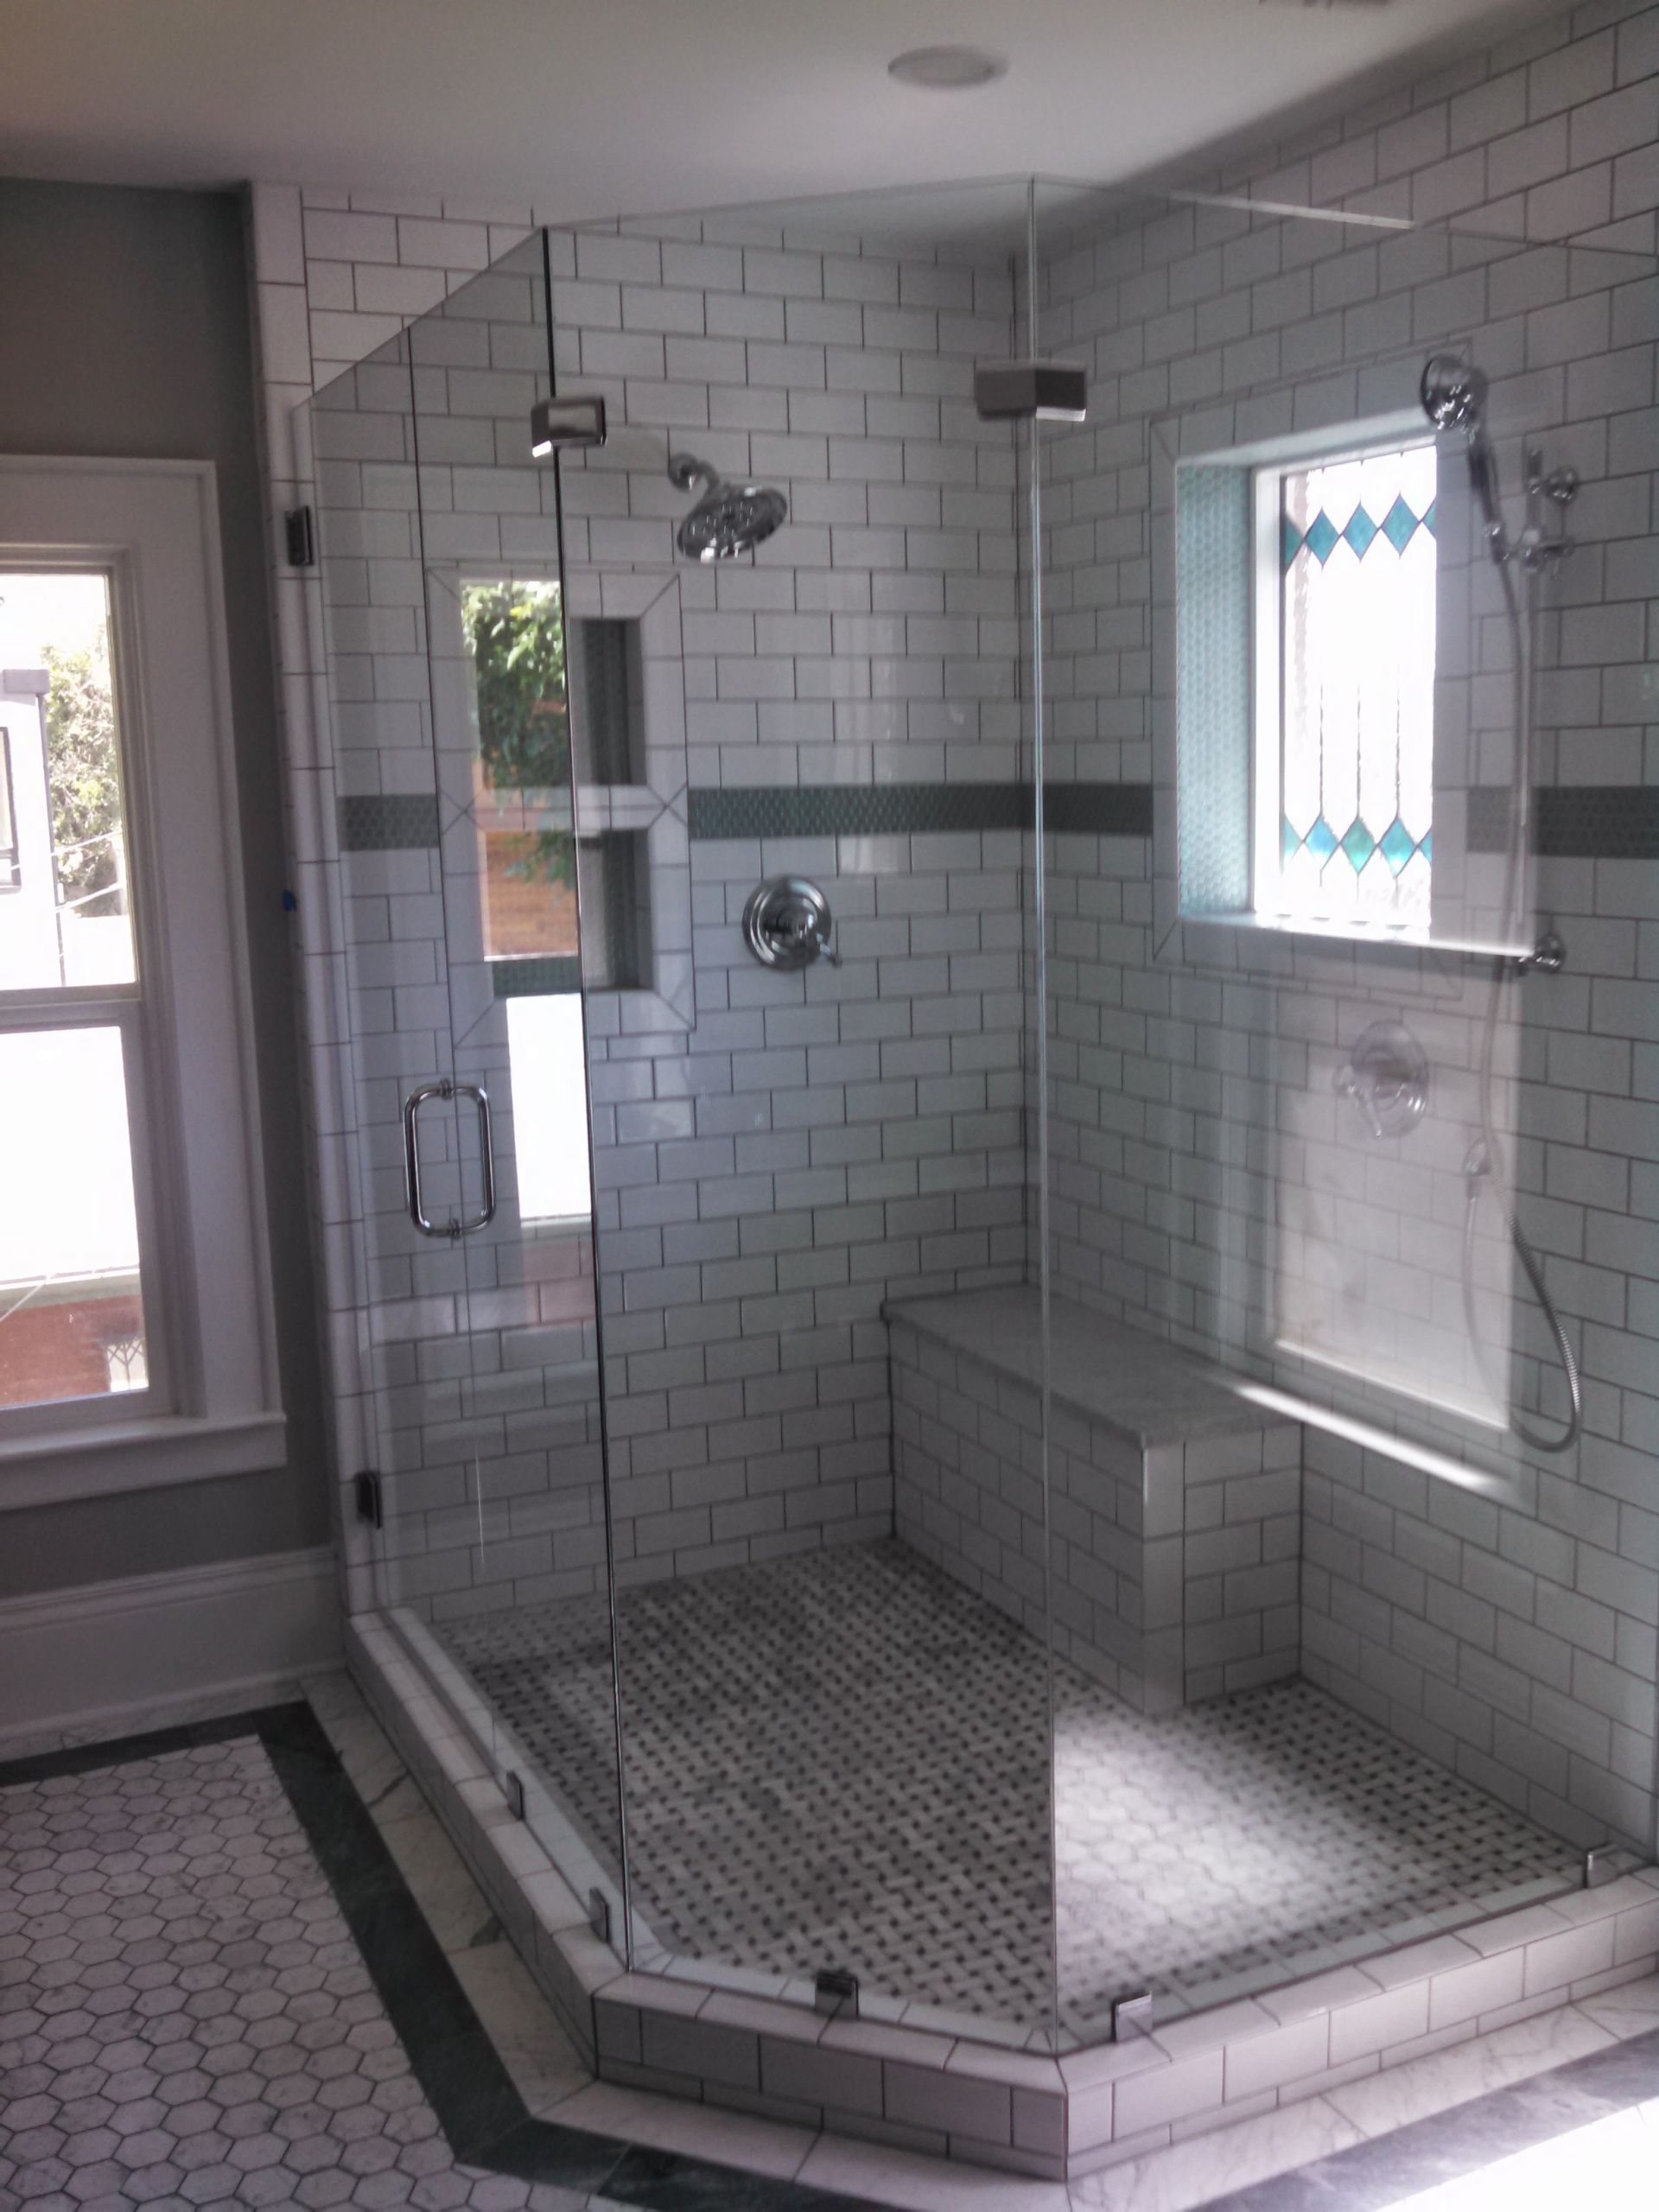 Denver Bathroom Remodel
 Denver Bathroom Remodeling Project